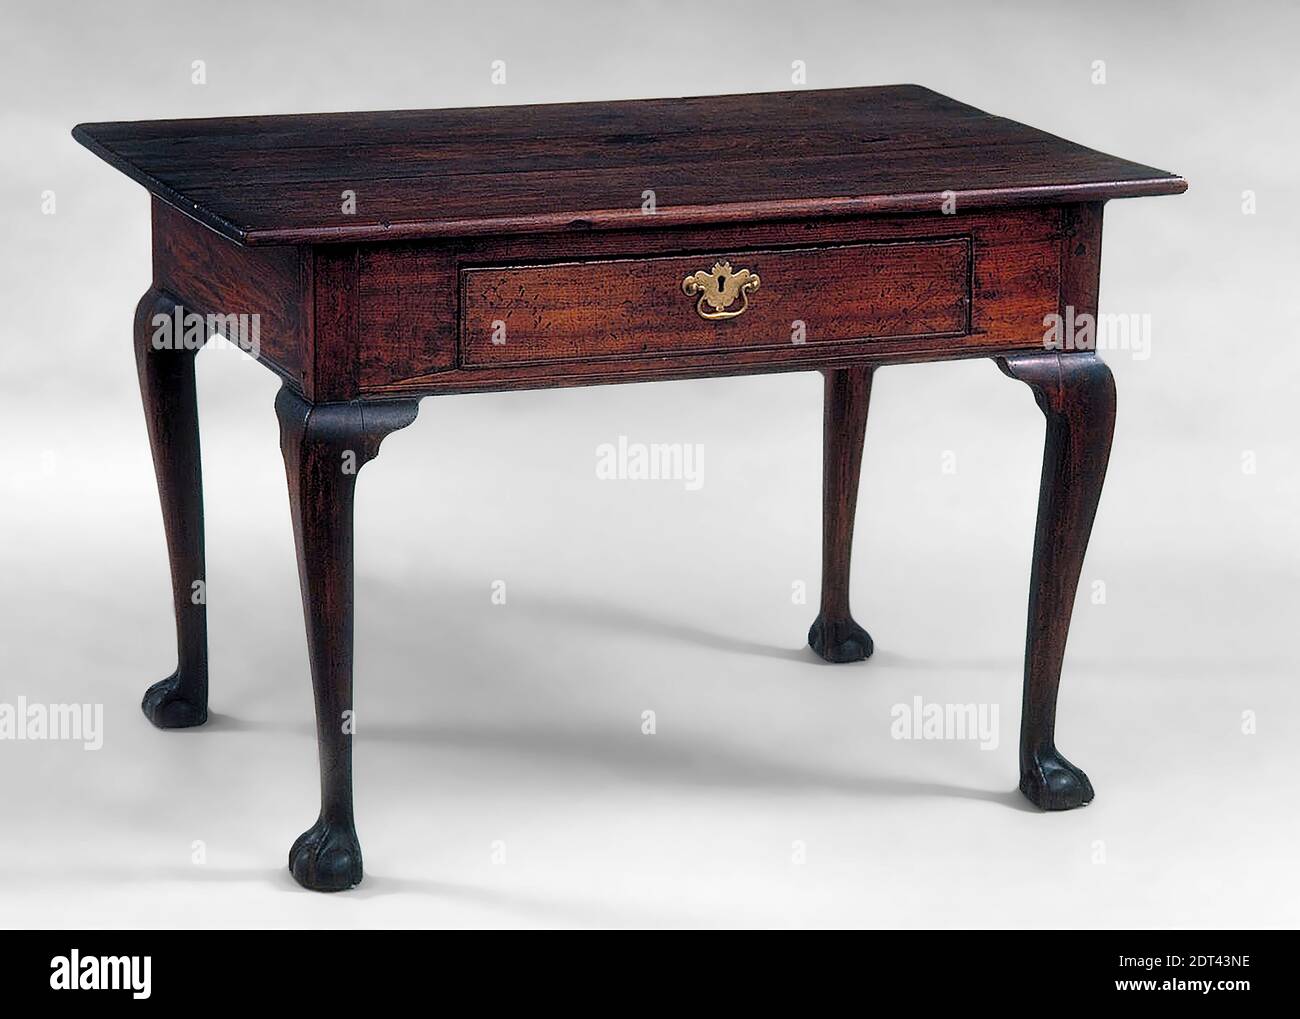 Table with Drawer, The primary wood, as well as the diagonal brace under the top and the drawer runners, has been identified as belonging to the family Lauraceae (laurel) and may possibly be red bay. The other secondary woods are mahogany (drawer sides and back) and baldcypress (drawer bottom), 28 3/4 × 42 15/16 × 28 7/16 in. (73 × 109.1 × 72.2 cm), Made in Charleston, South Carolina, North America, American, 18th century, Furniture Stock Photo